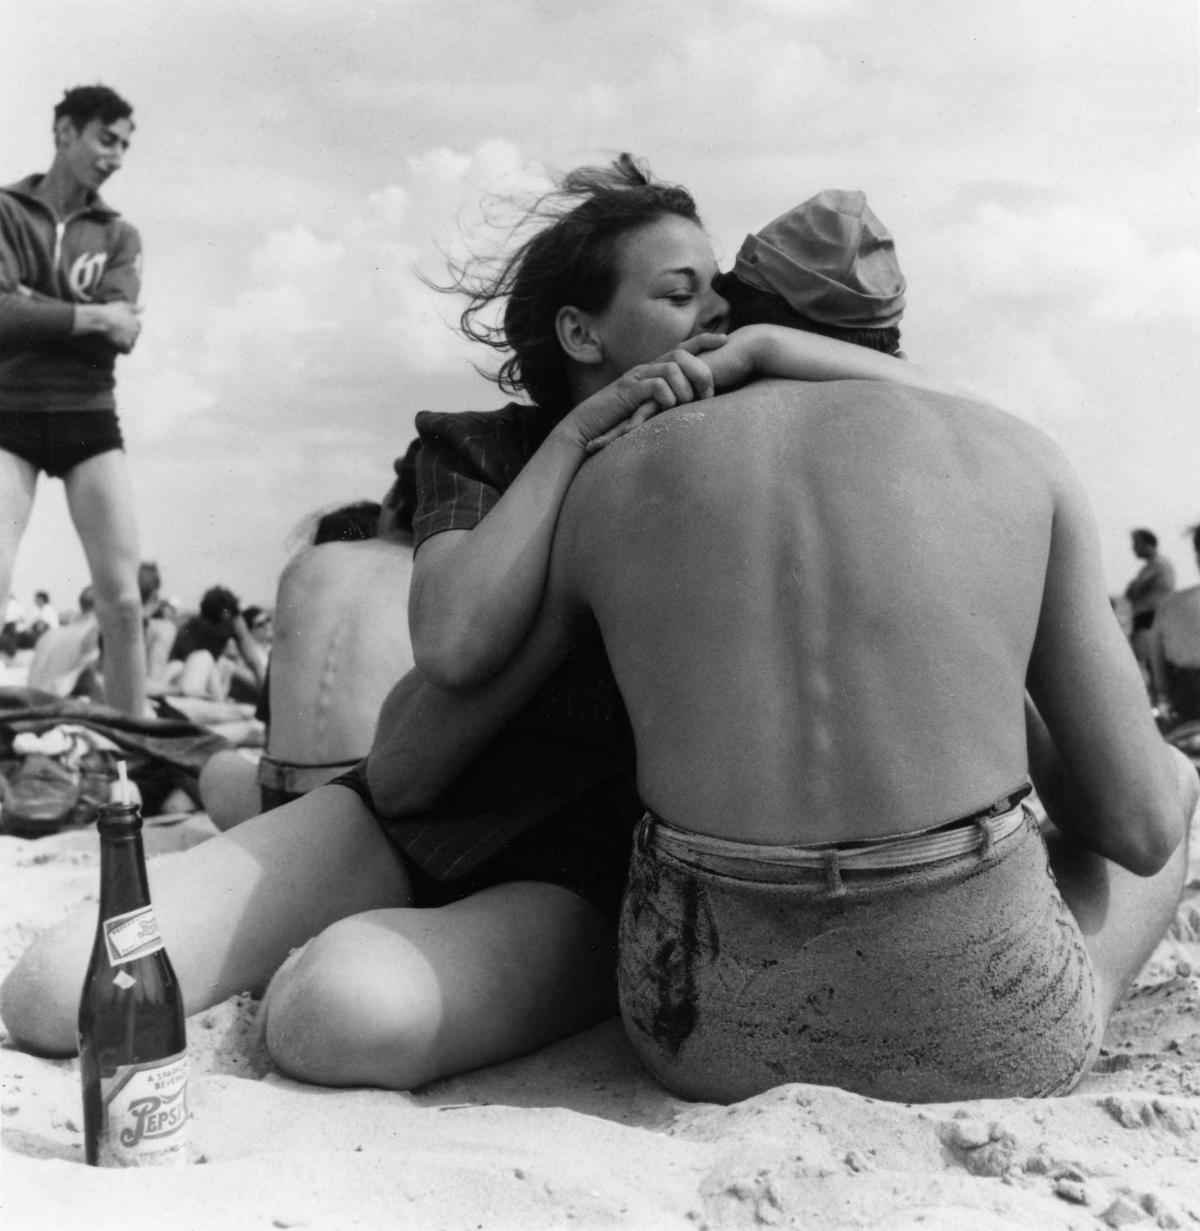 Black and white photo of a man and woman embracing on the beach at Coney Island, with the man's back to the viewer and the woman whispering in his ear